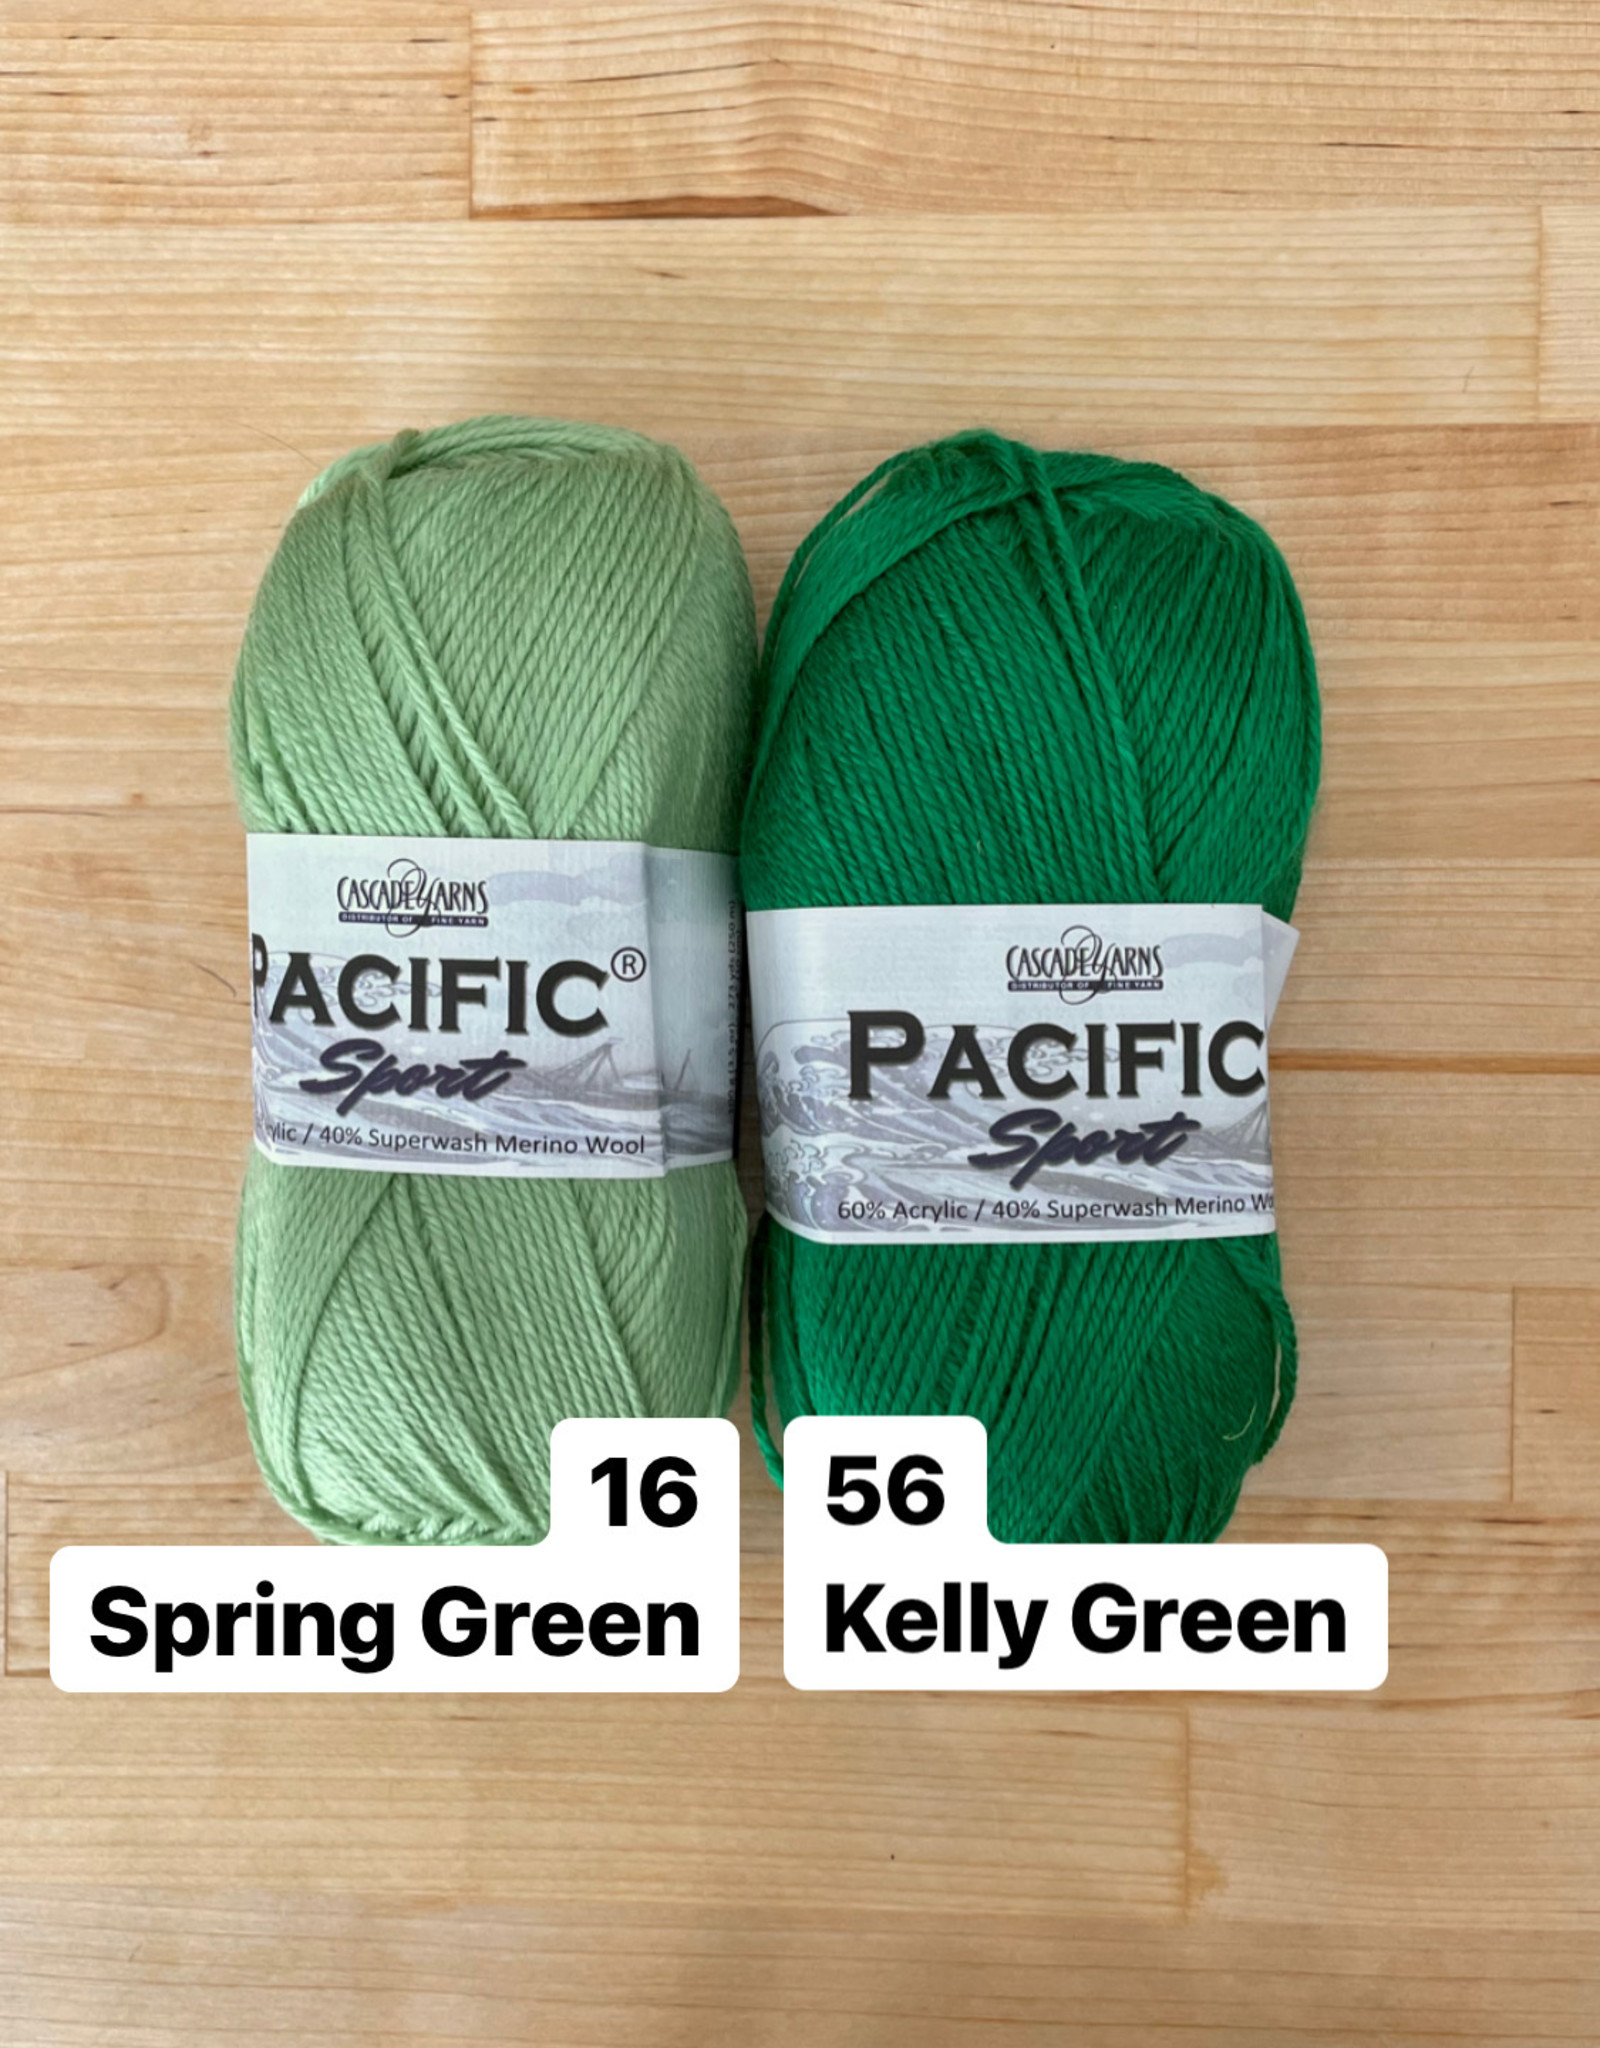 Pacific - Kelly Green 56